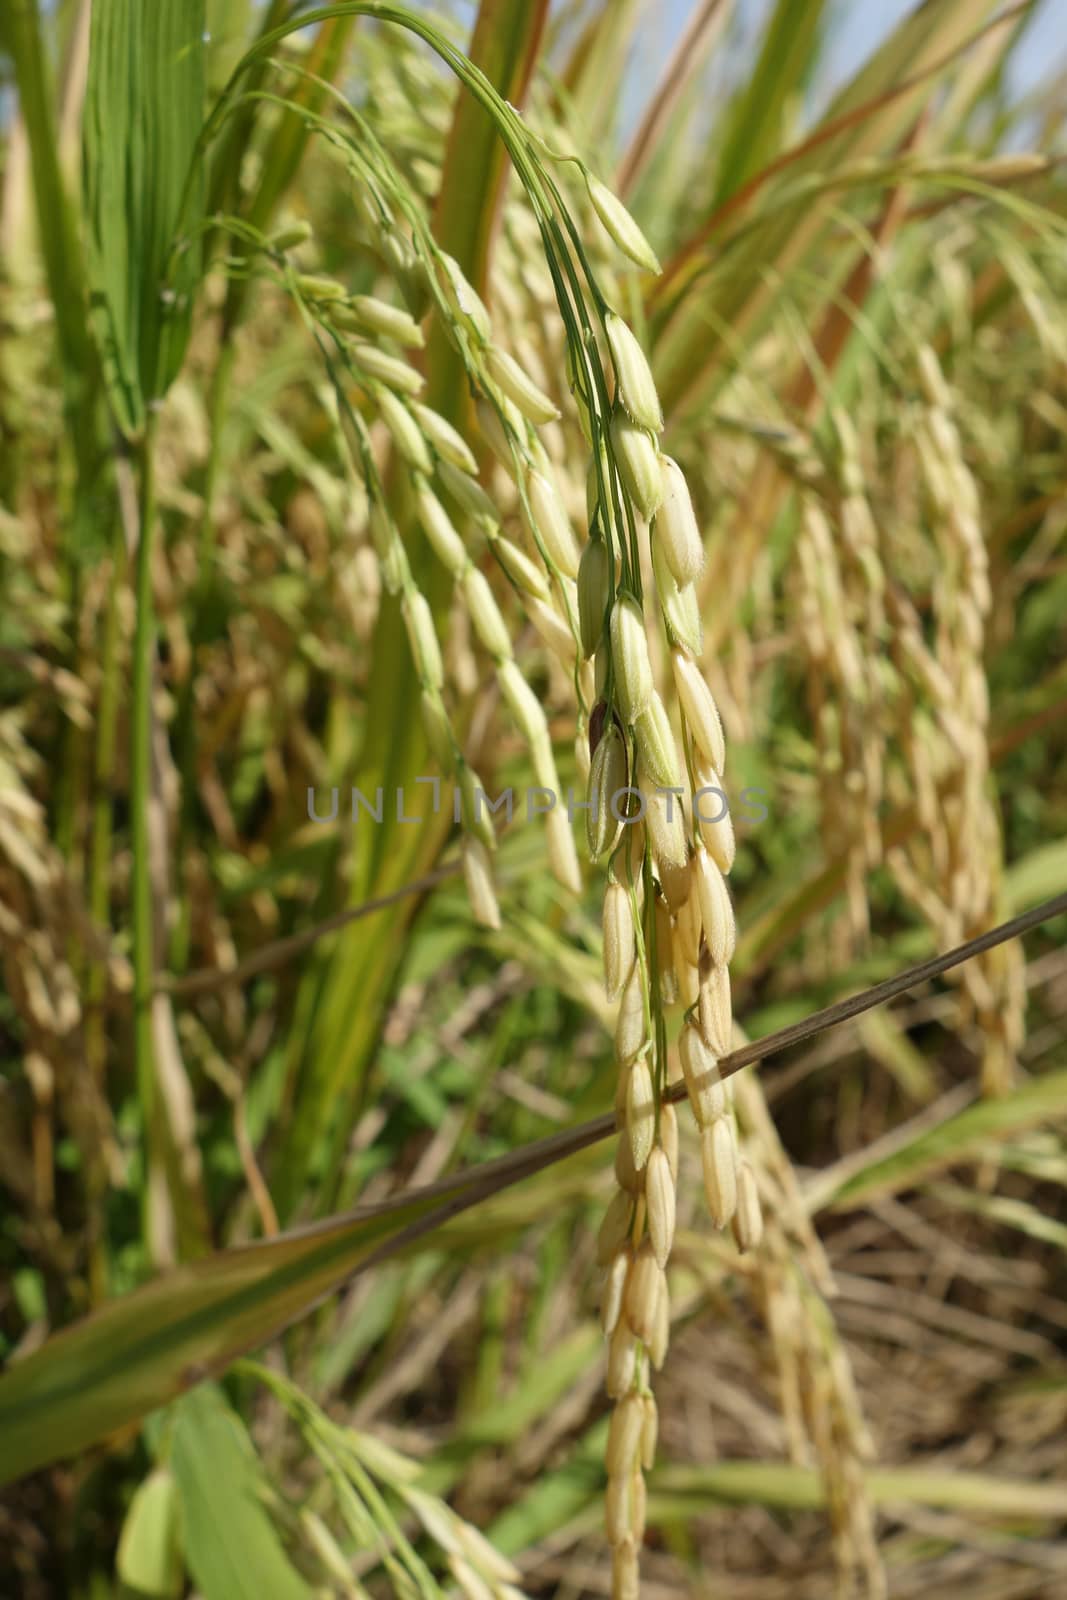 Ripe rice grains in Asia before harvest by tang90246